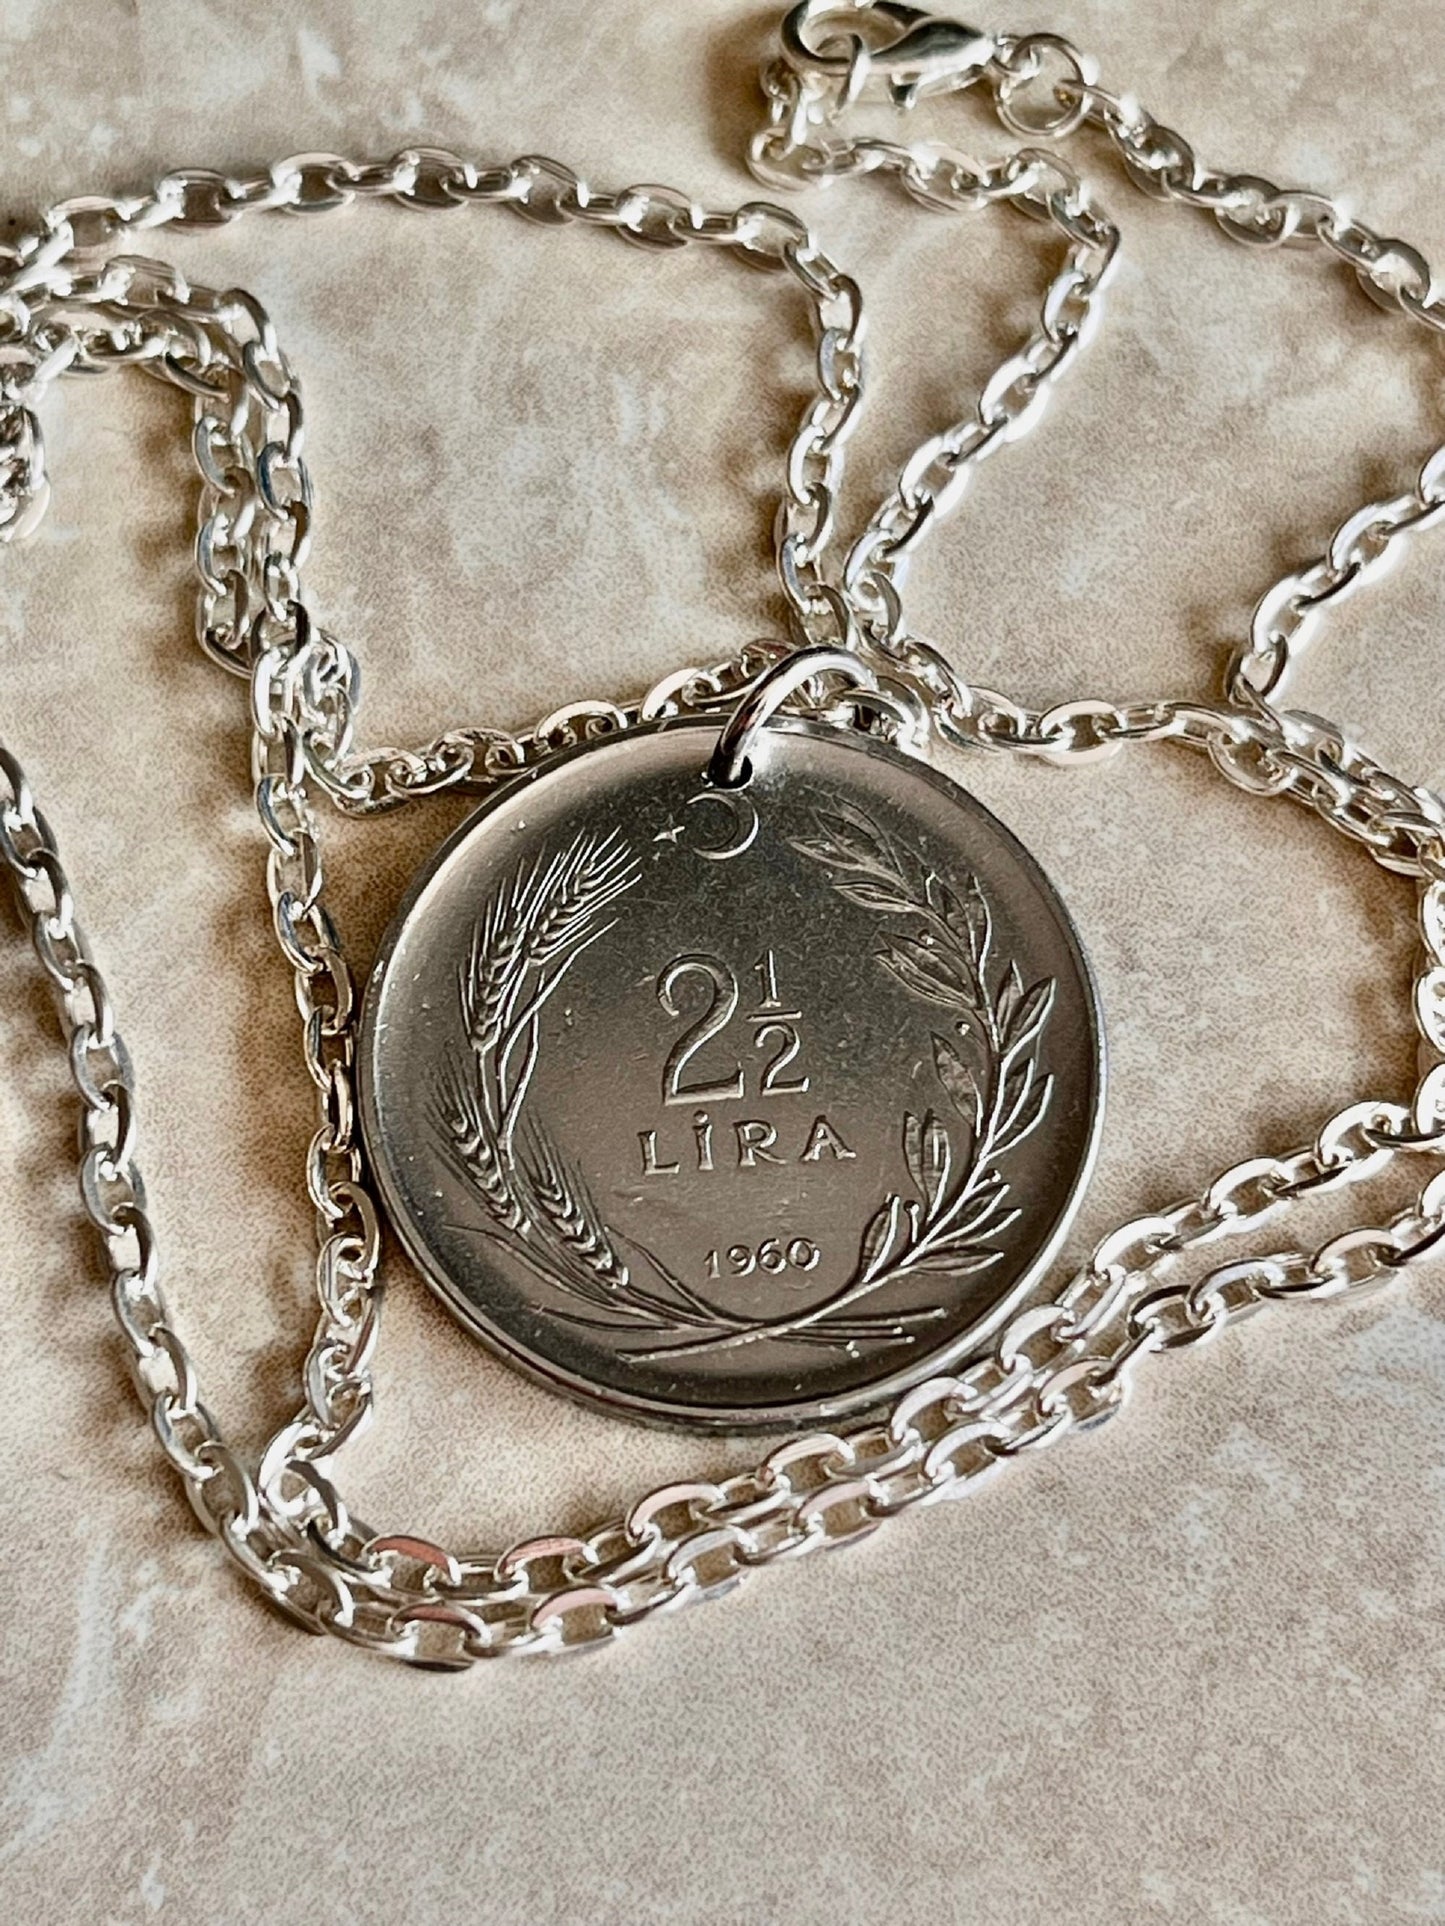 Turkey Coin Necklace Turkish 2 1/2 Lira Bin Lira Personal Old Vintage Handmade Jewelry Gift Friend Charm For Him Her World Coin Collector